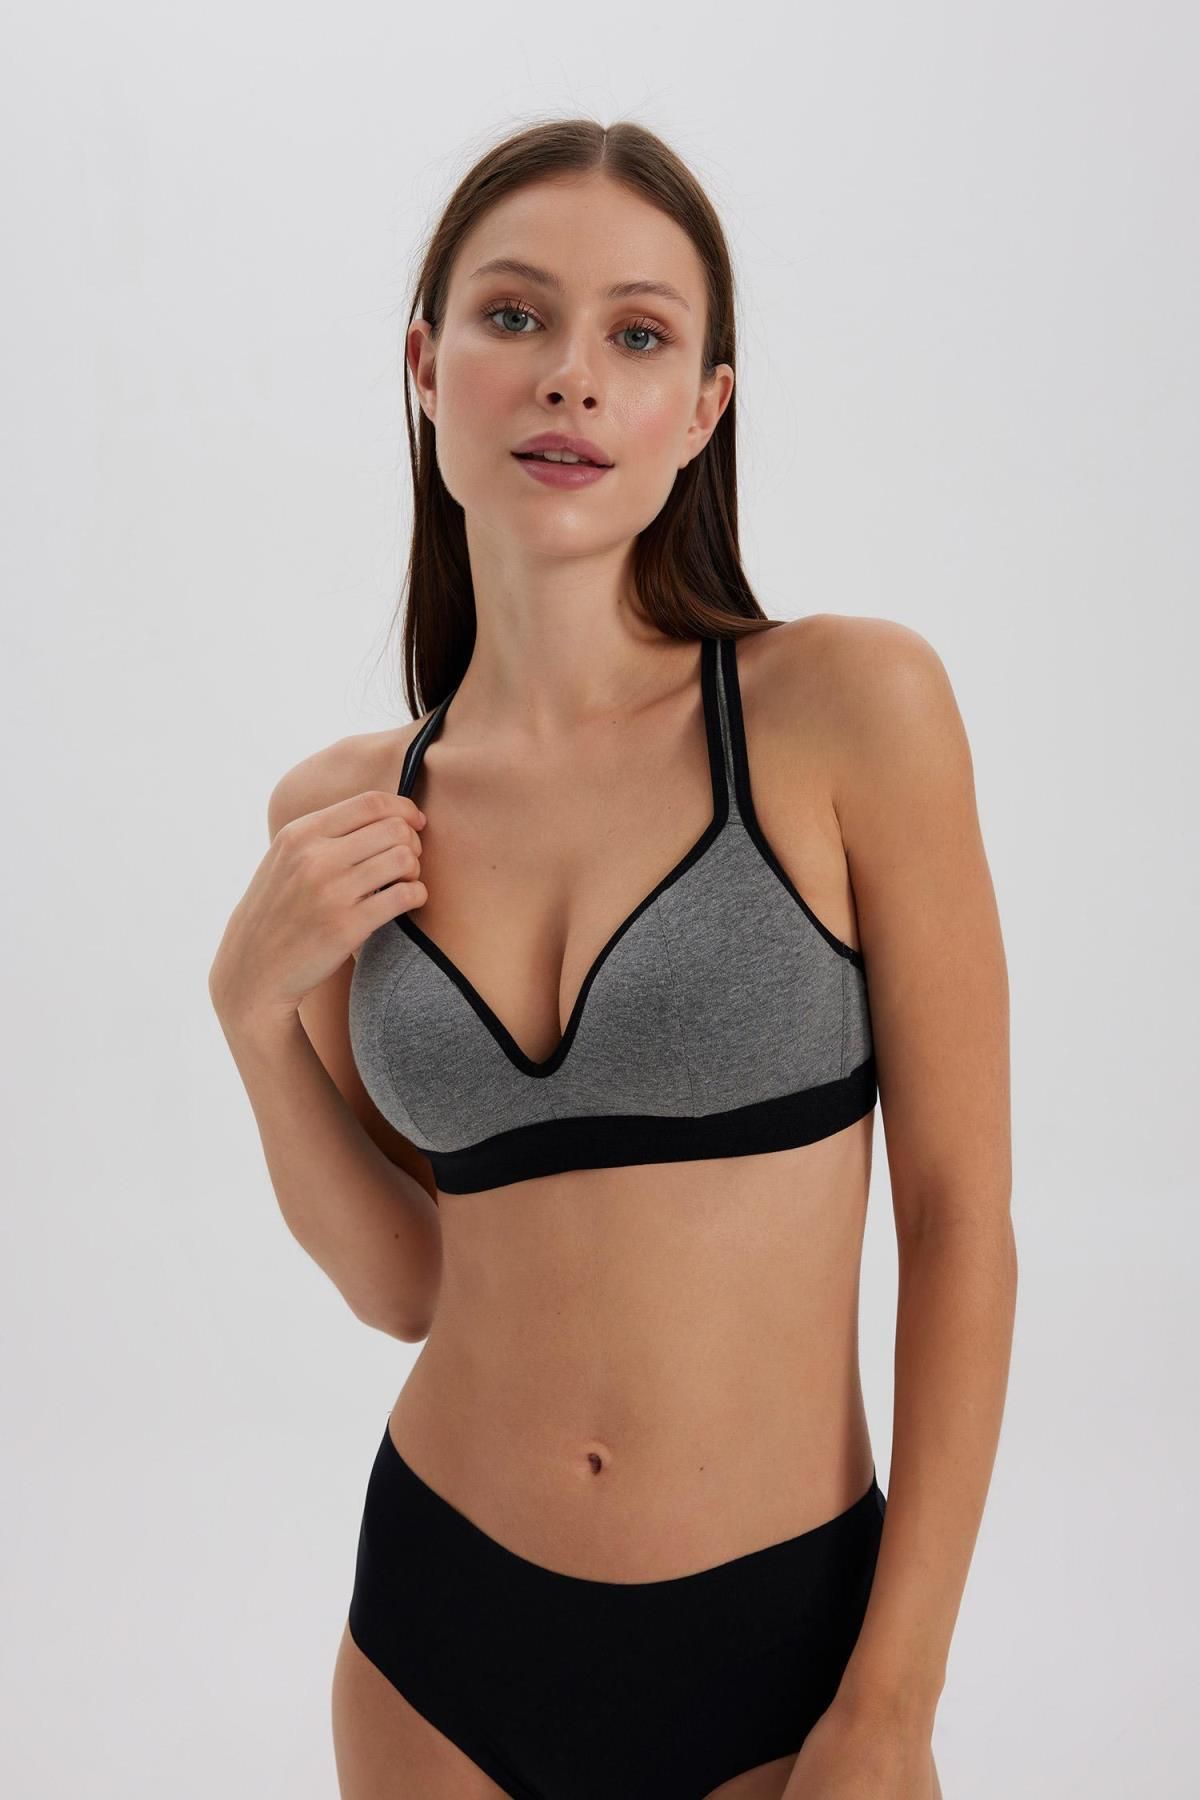 Defacto Fall In Love Lace Detailed Coverless Padless Bra - Trendyol